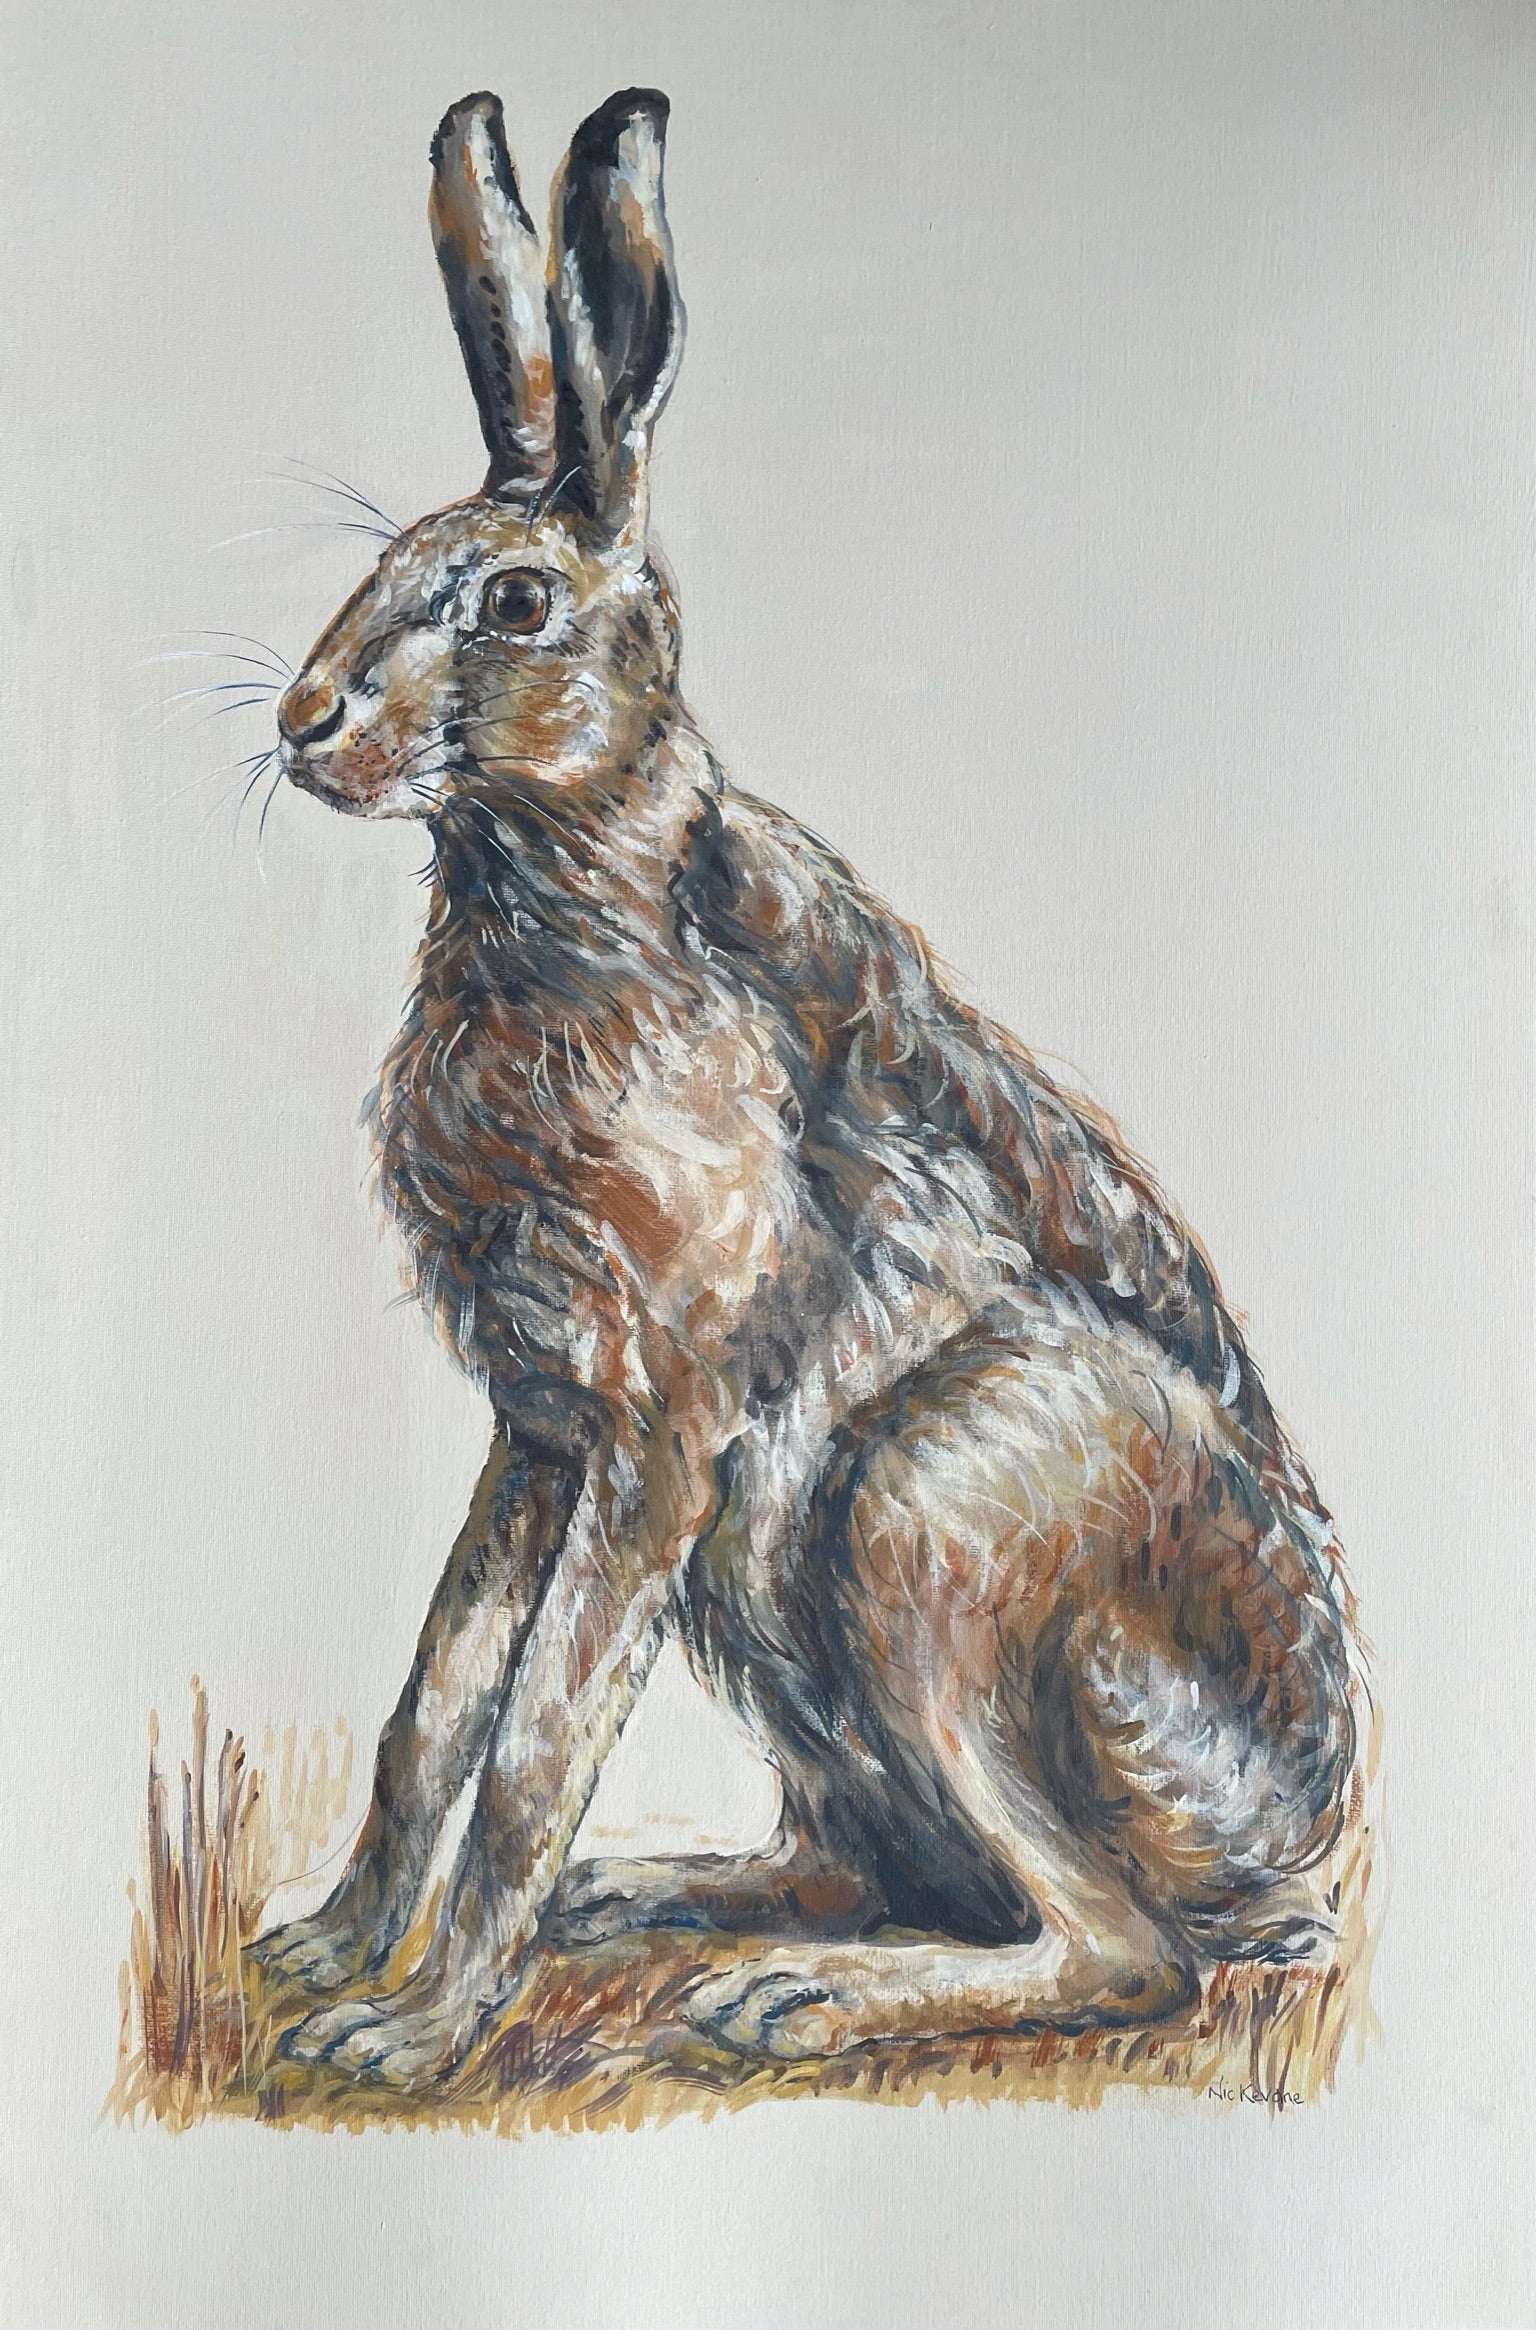 A painting of a hare in a wheat stubble field before he dashes away.  I love to paint the shades of brown and grey found in the hare's fur.